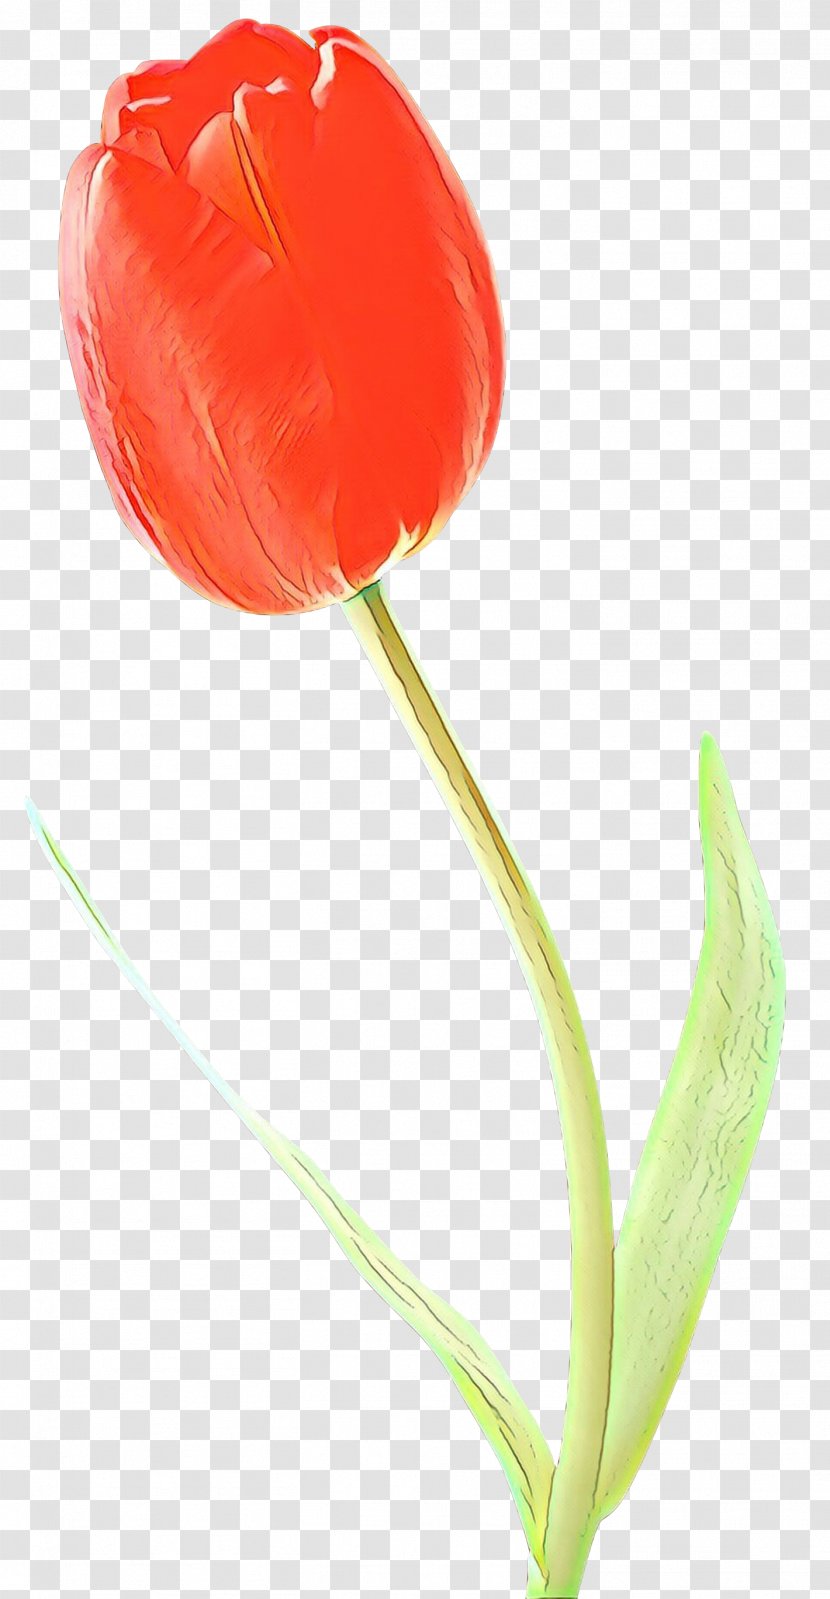 Flowers Background - Cut - Lily Family Anthurium Transparent PNG